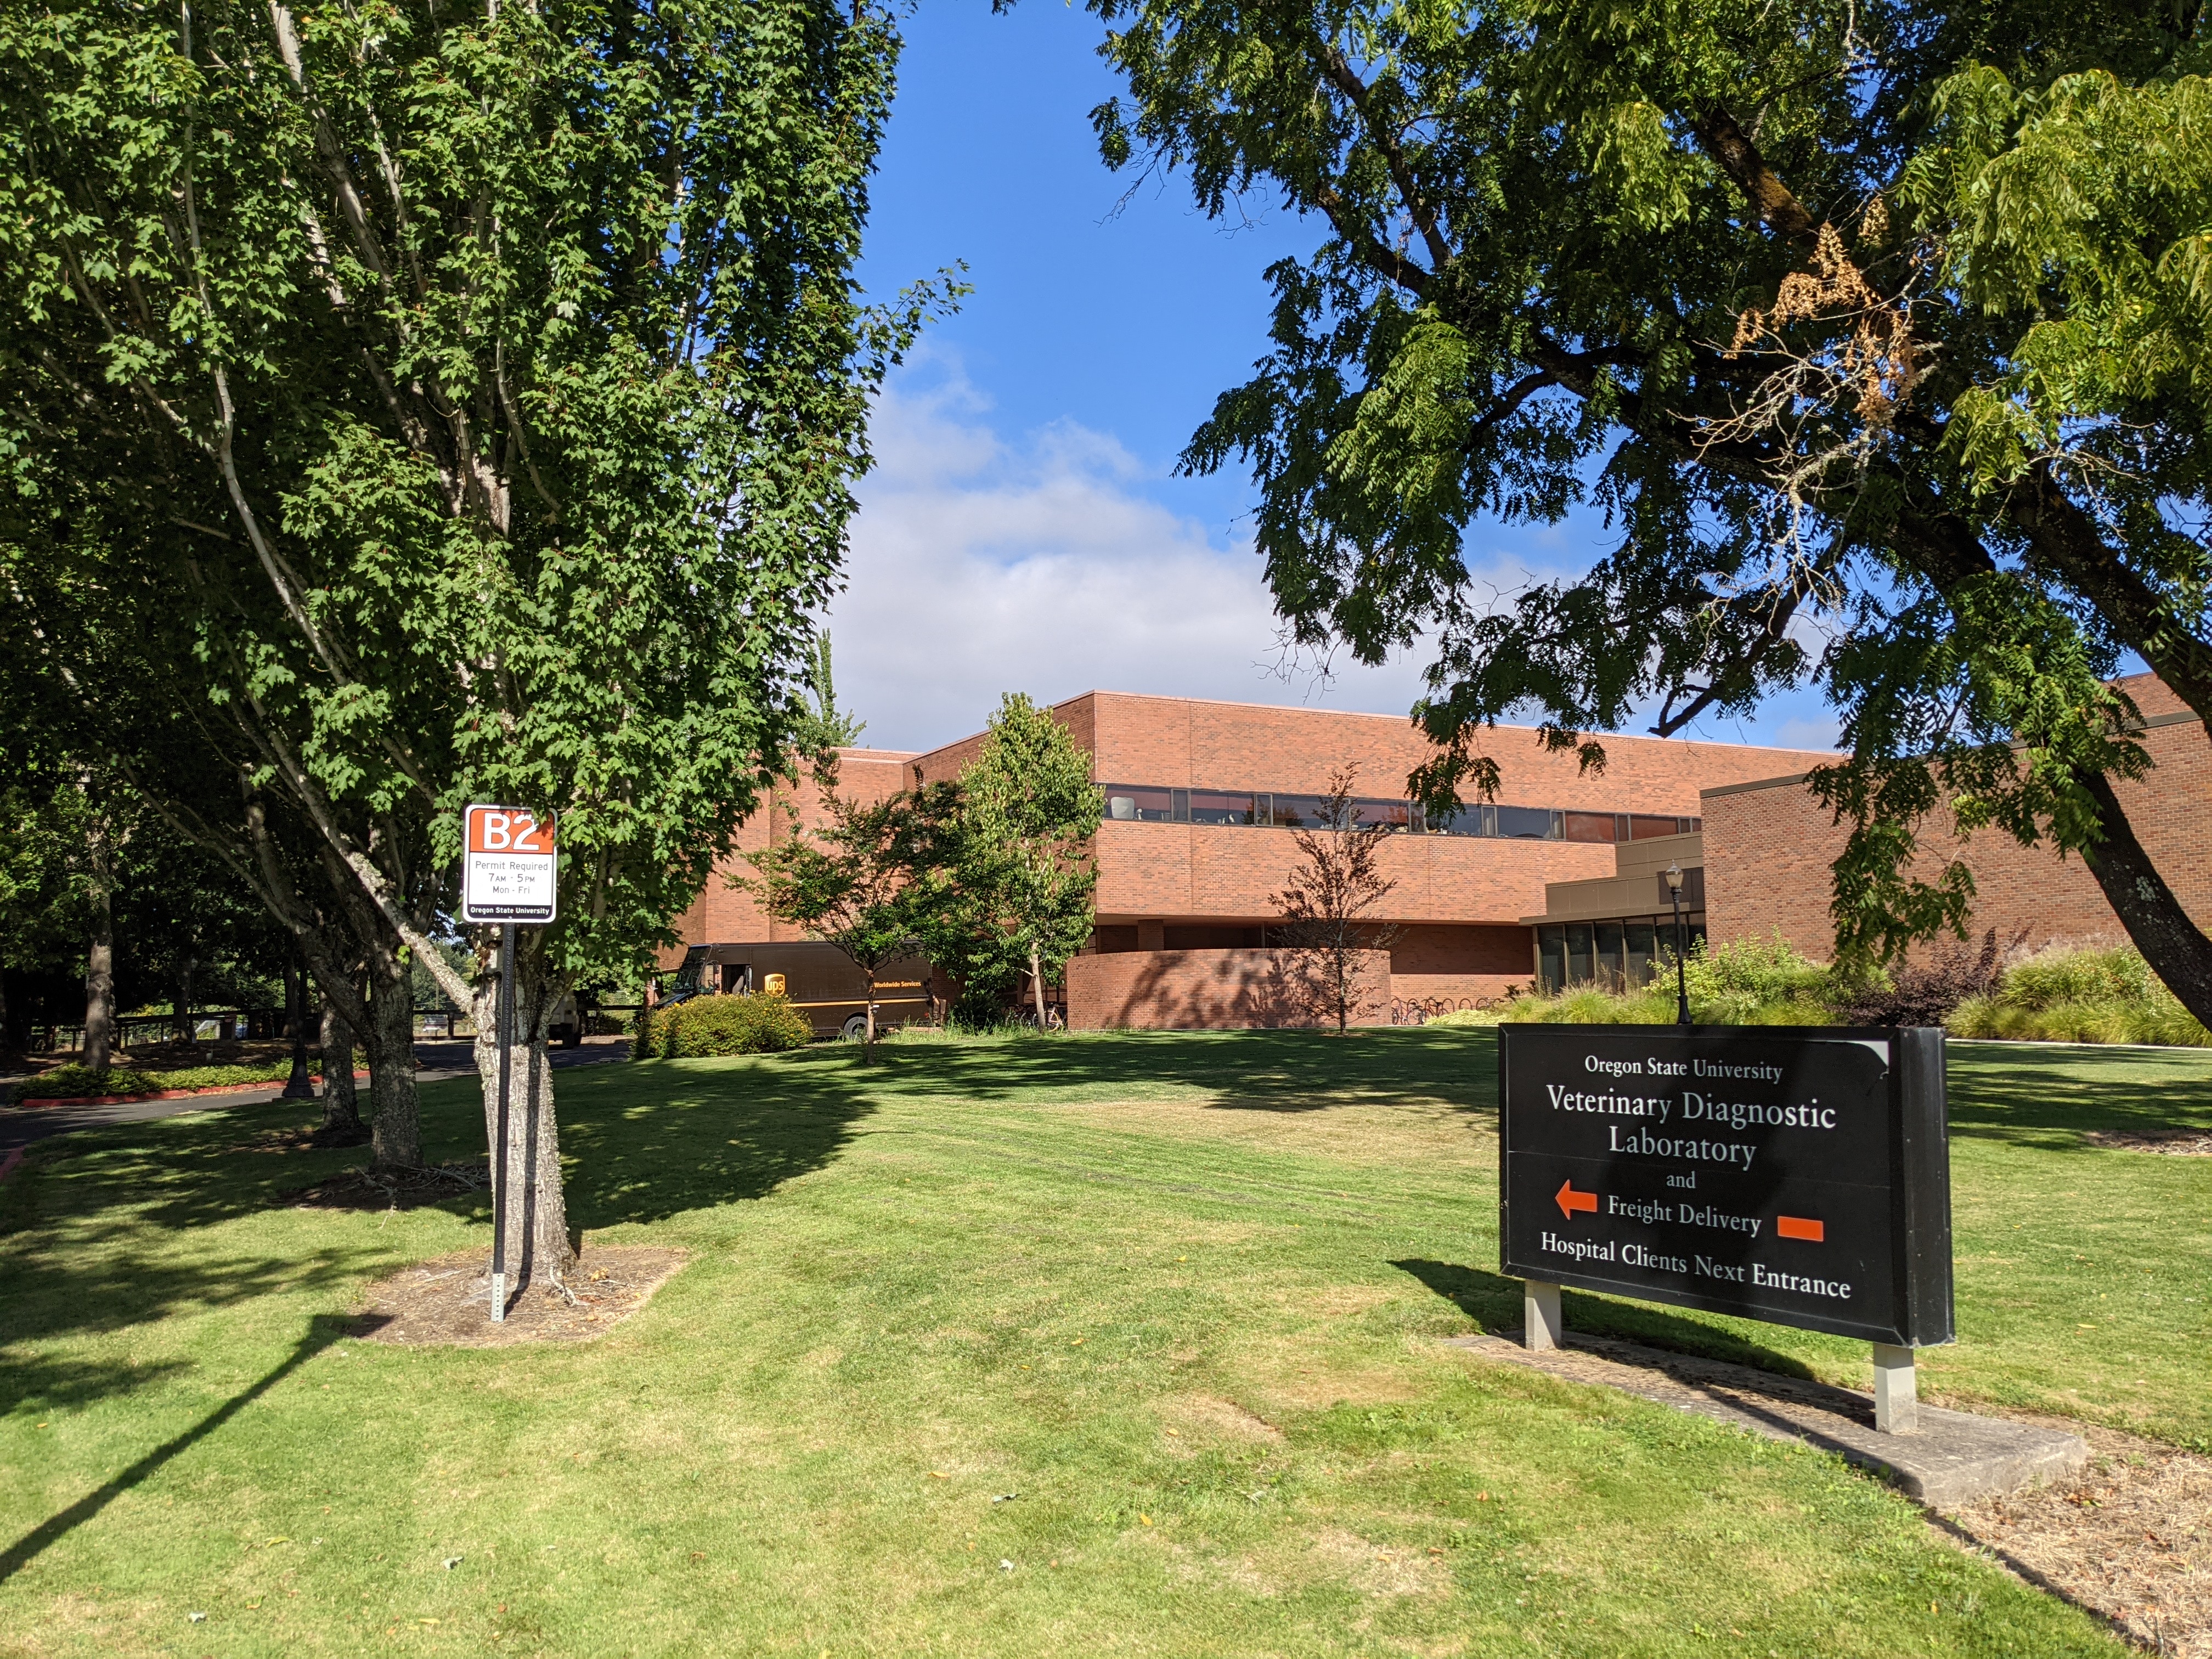 The Oregon Veterinary Diagnostic Laboratory is housed in Magruder Hall on the Oregon State University campus in Corvallis, Oregon.